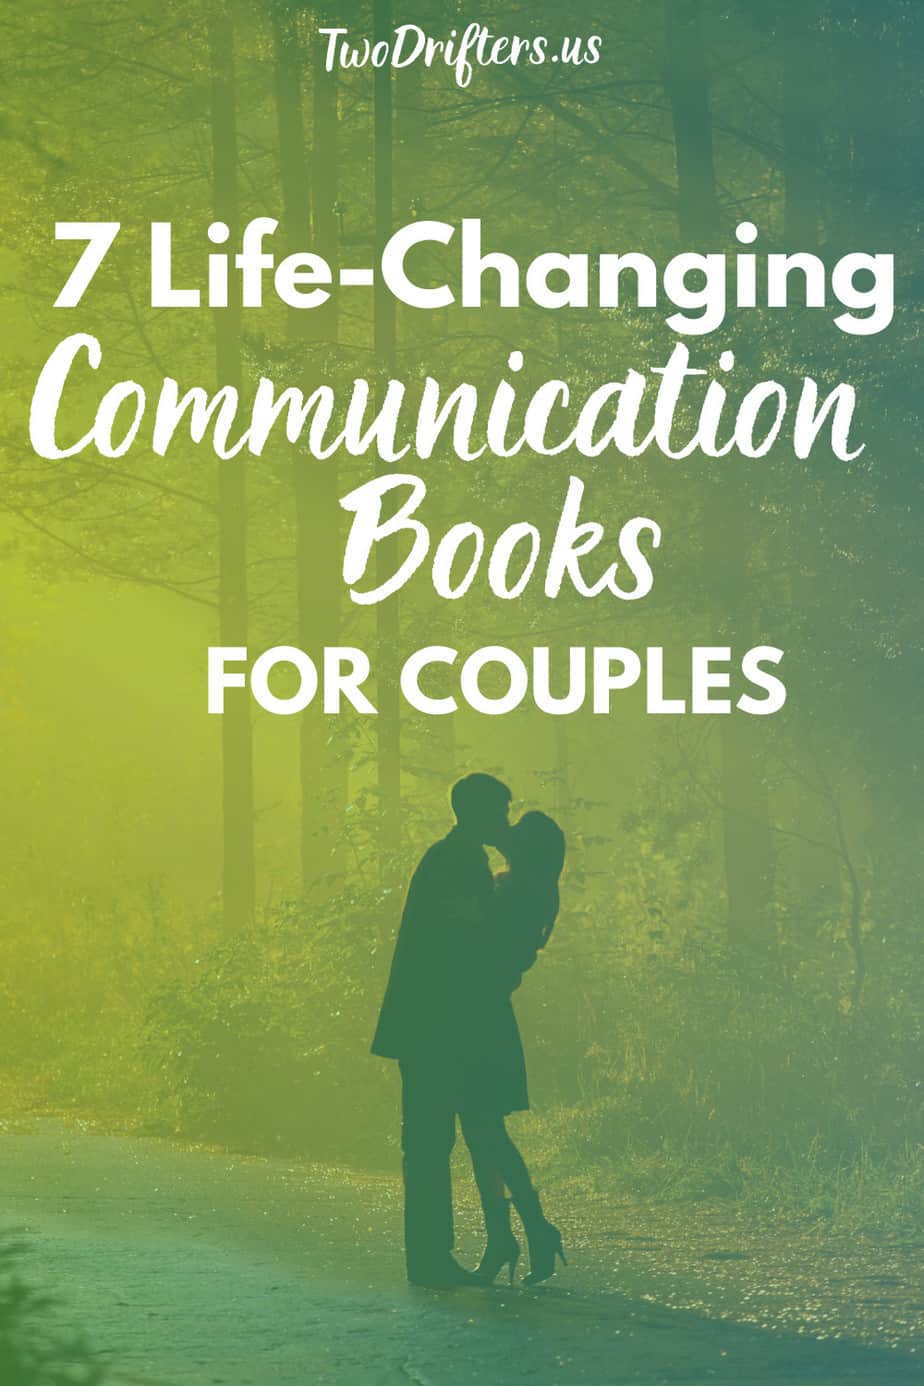 Pinterest social share image that says "7 Life-Changing Communication Books for Couples."